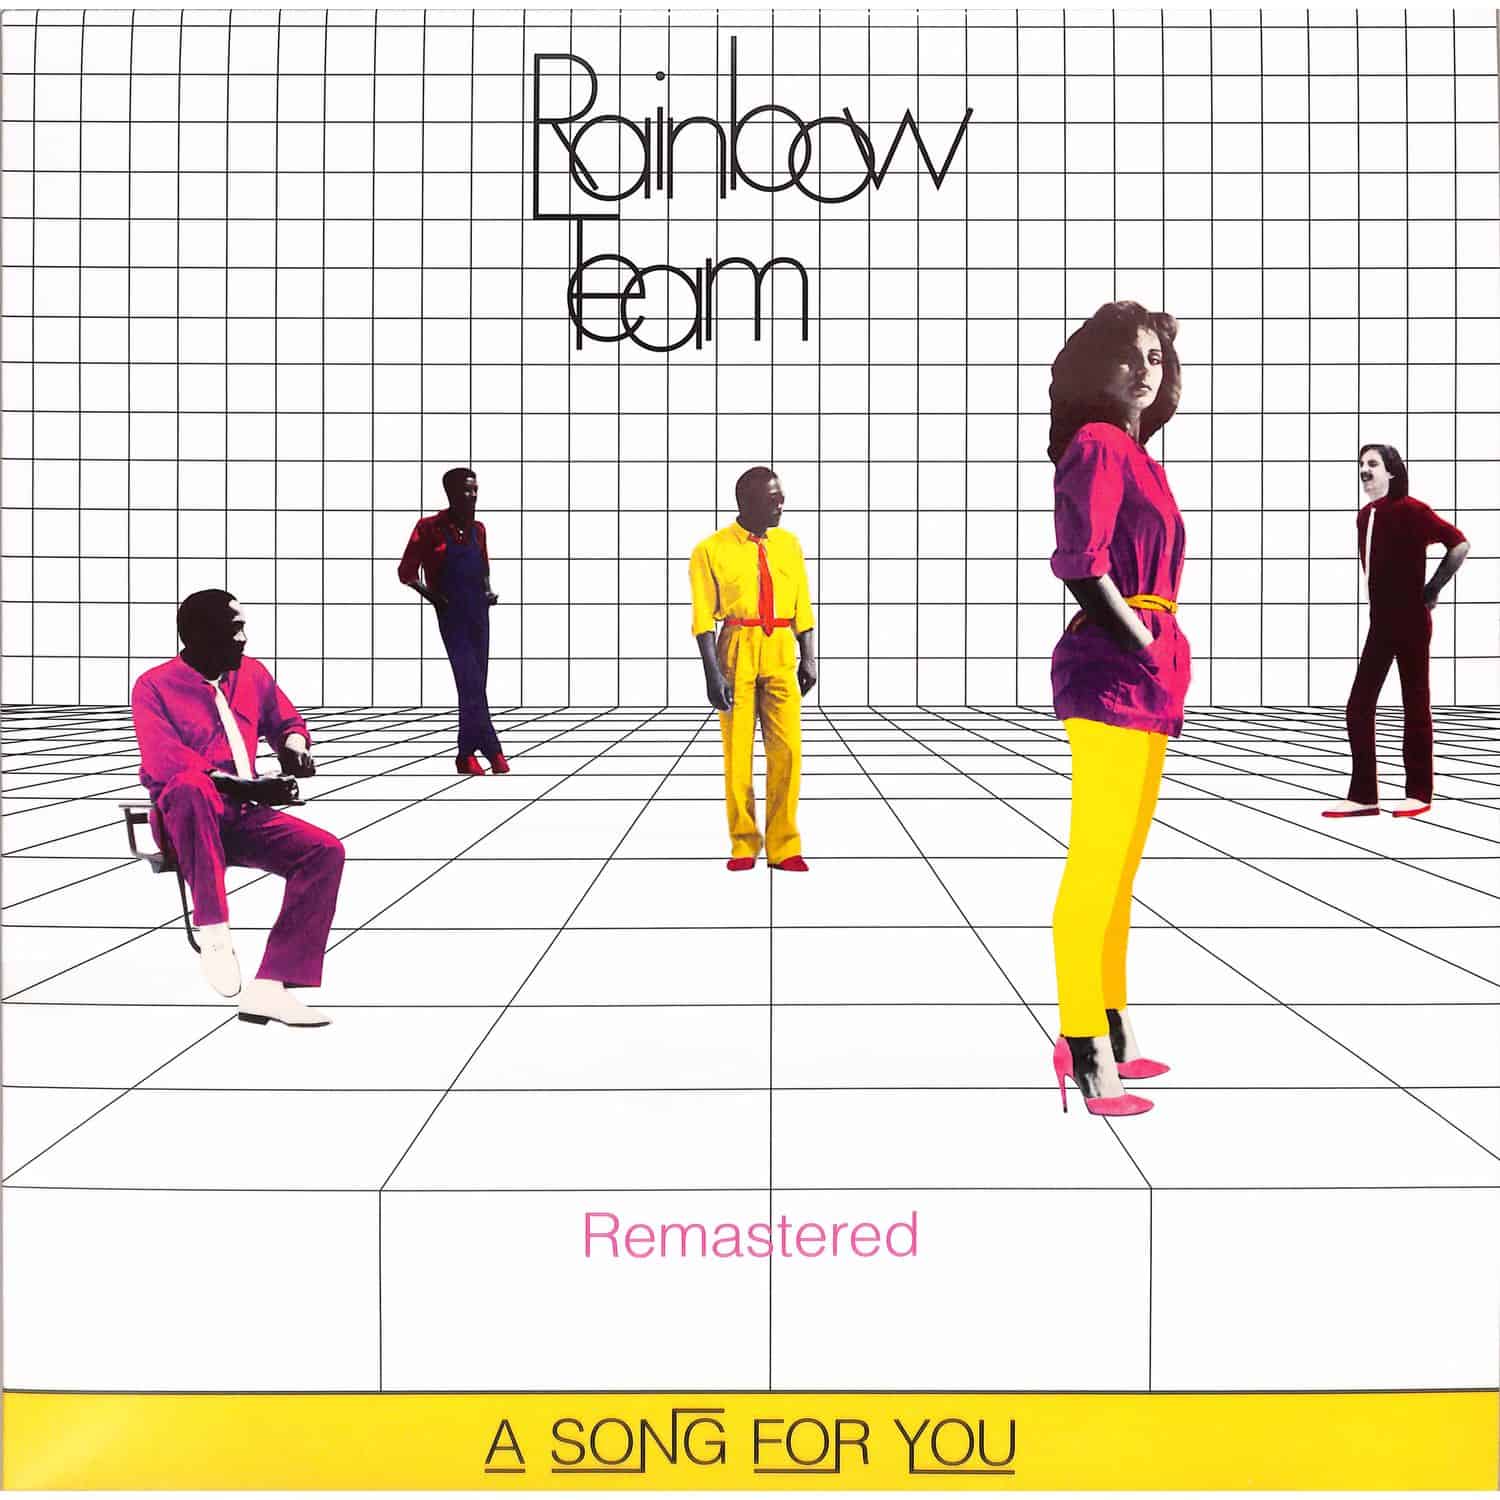 Rainbow Team - A SONG FOR YOU 